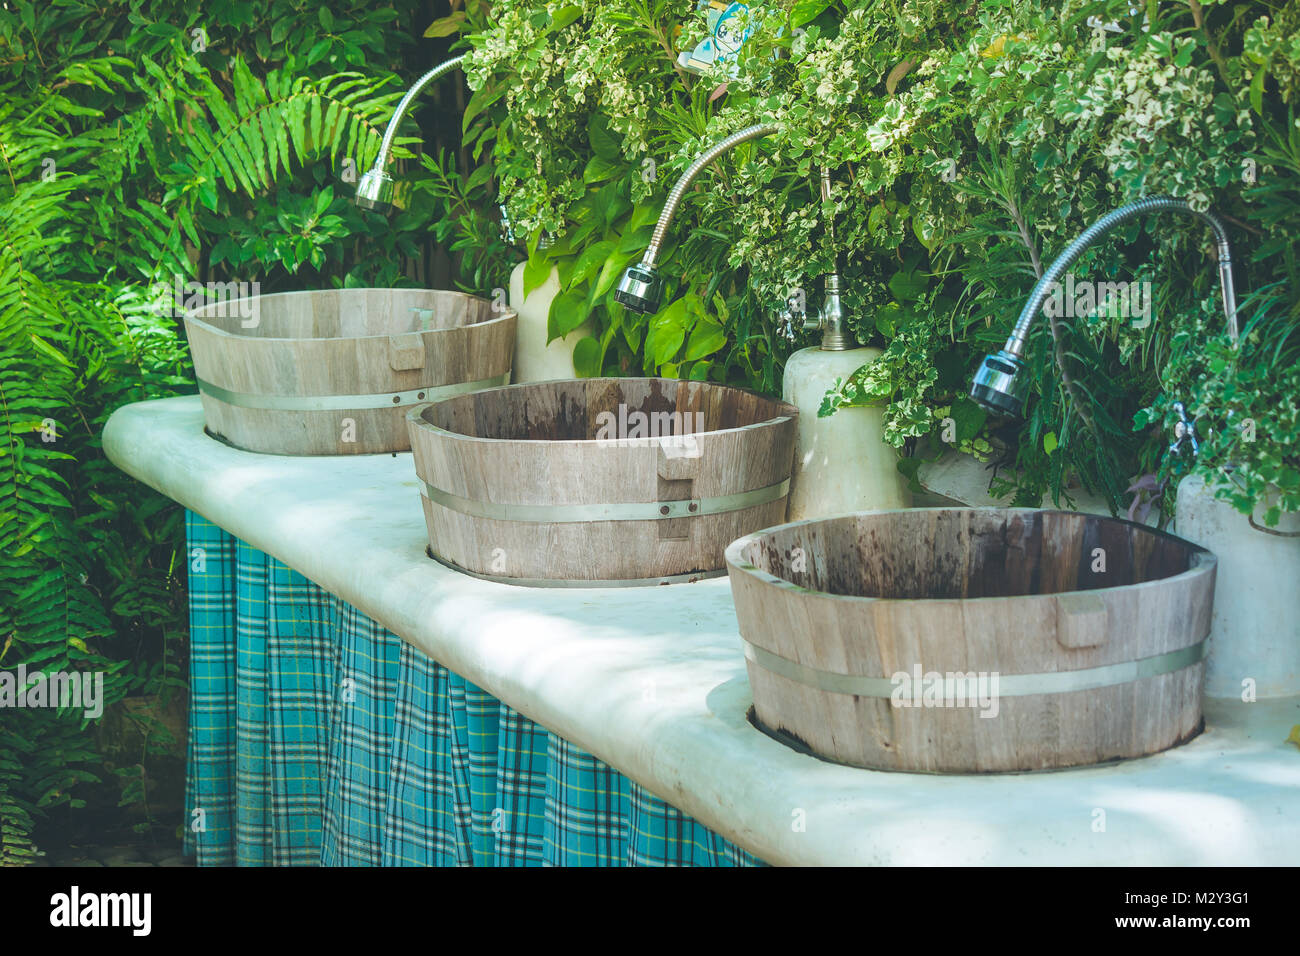 Tropical view row of wooden sinks & faucet in Japanese design with vertical plants wall background at outdoor garden. Stock Photo